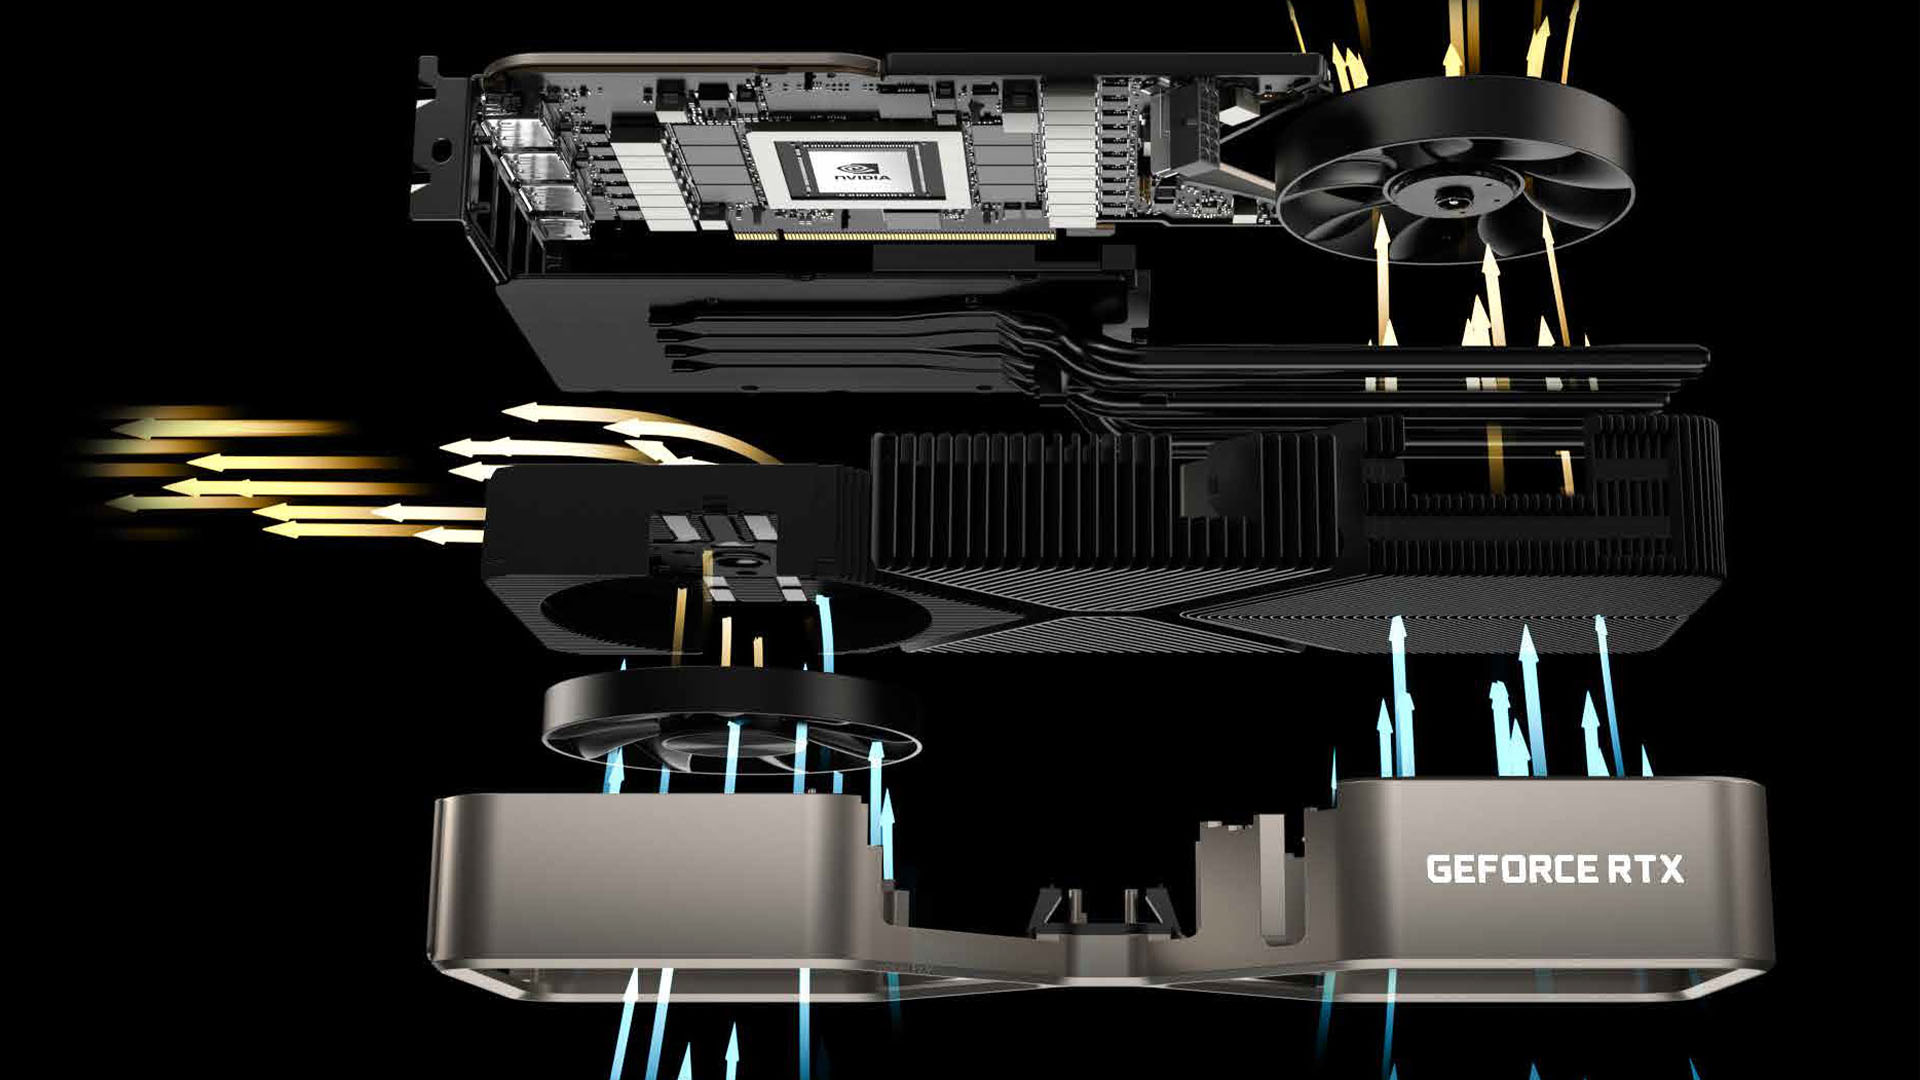 Nvidia GeForce RTX 3080 Founders Edition cooler